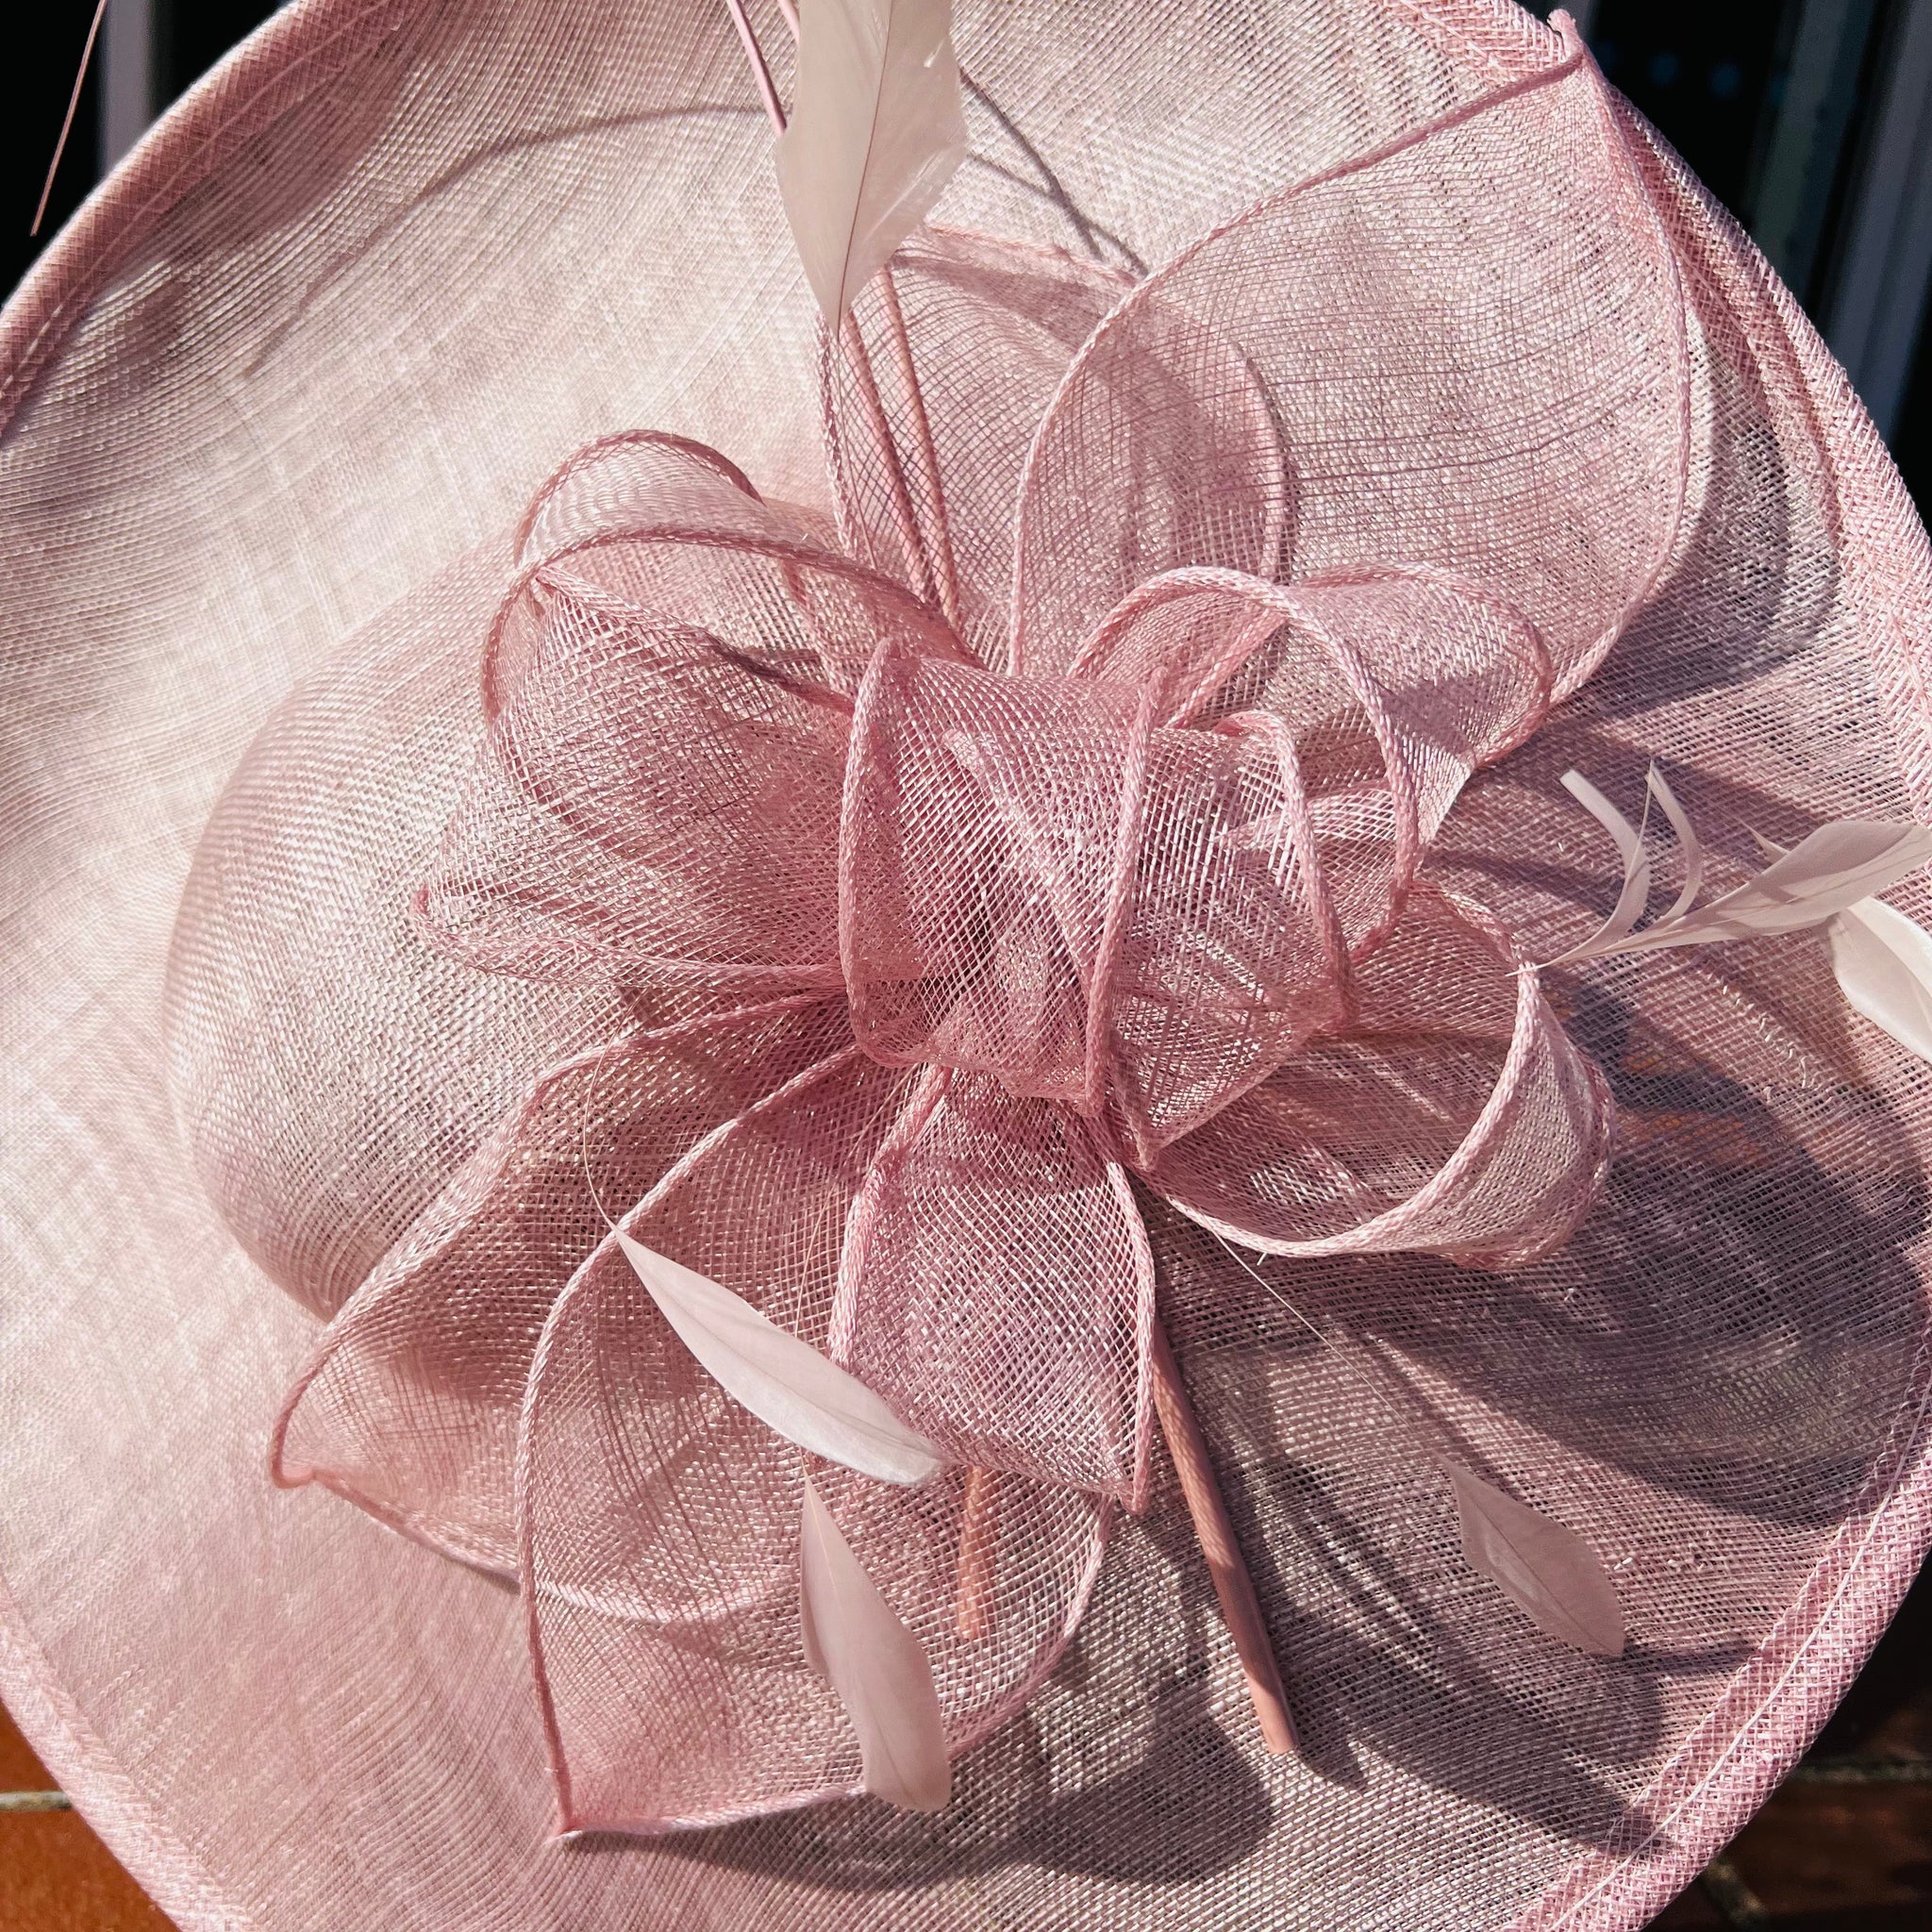 Extra Large Round Sinamay Fascinator with Bow and Quills